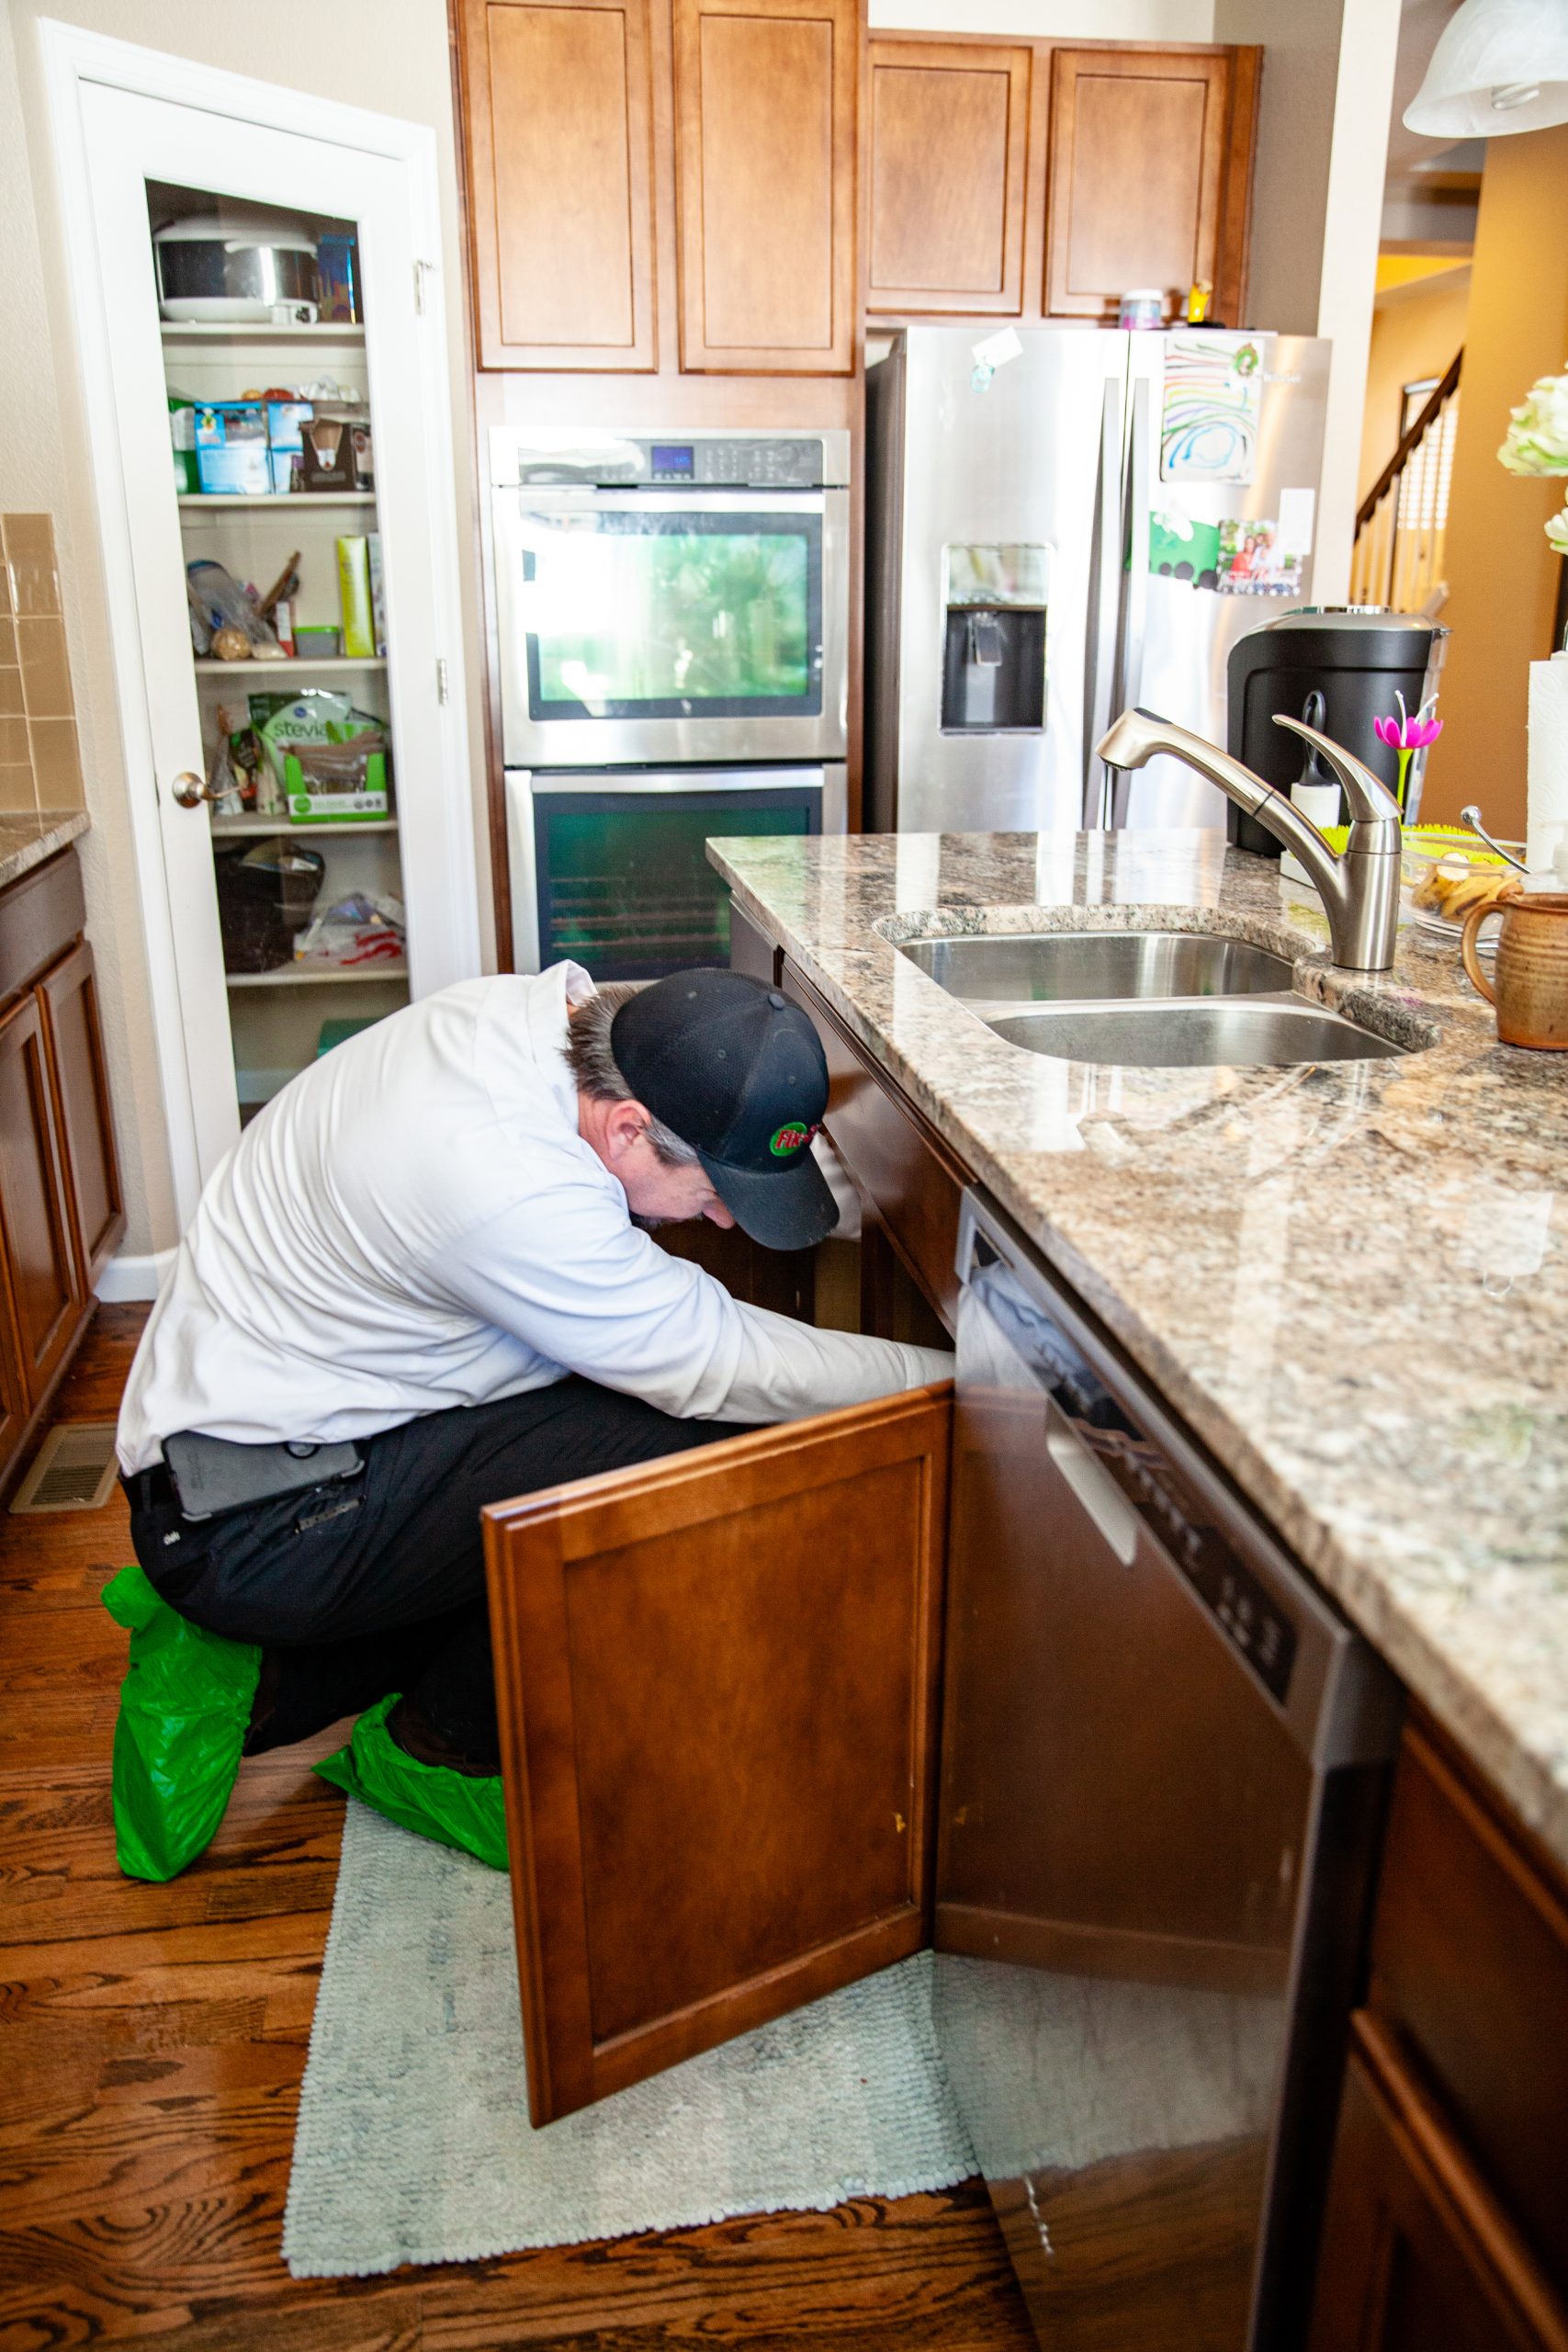 Sink Repair & Installation in Golden, CO from Fix-it 24/7 Plumbing, Heating, Air & Electric